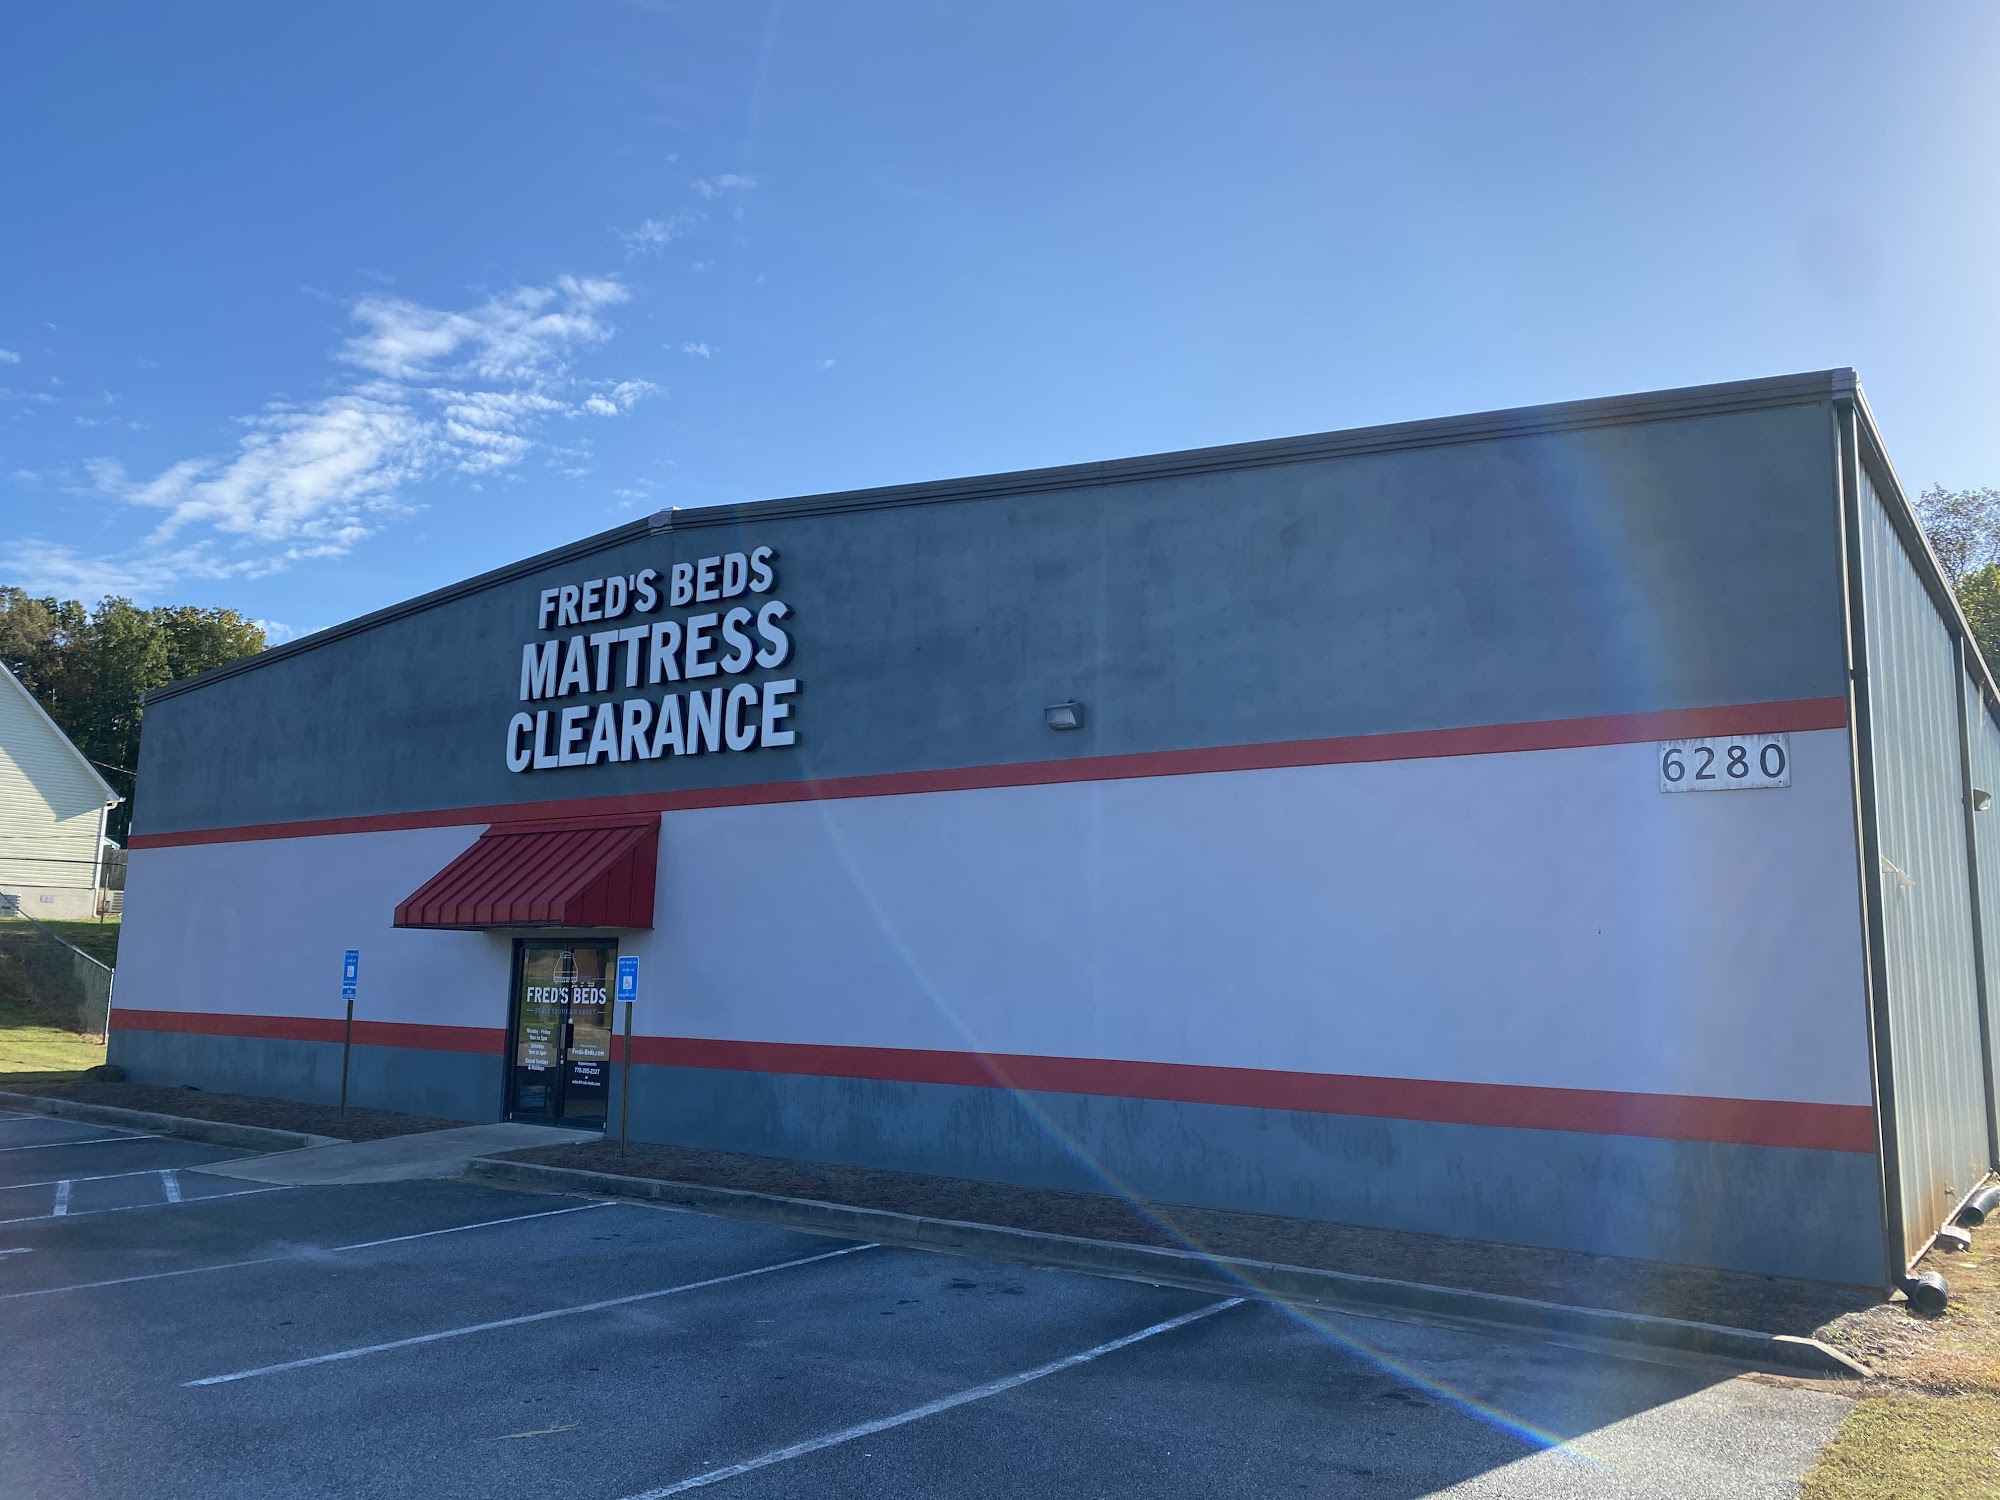 Fred's Beds Mattress Clearance